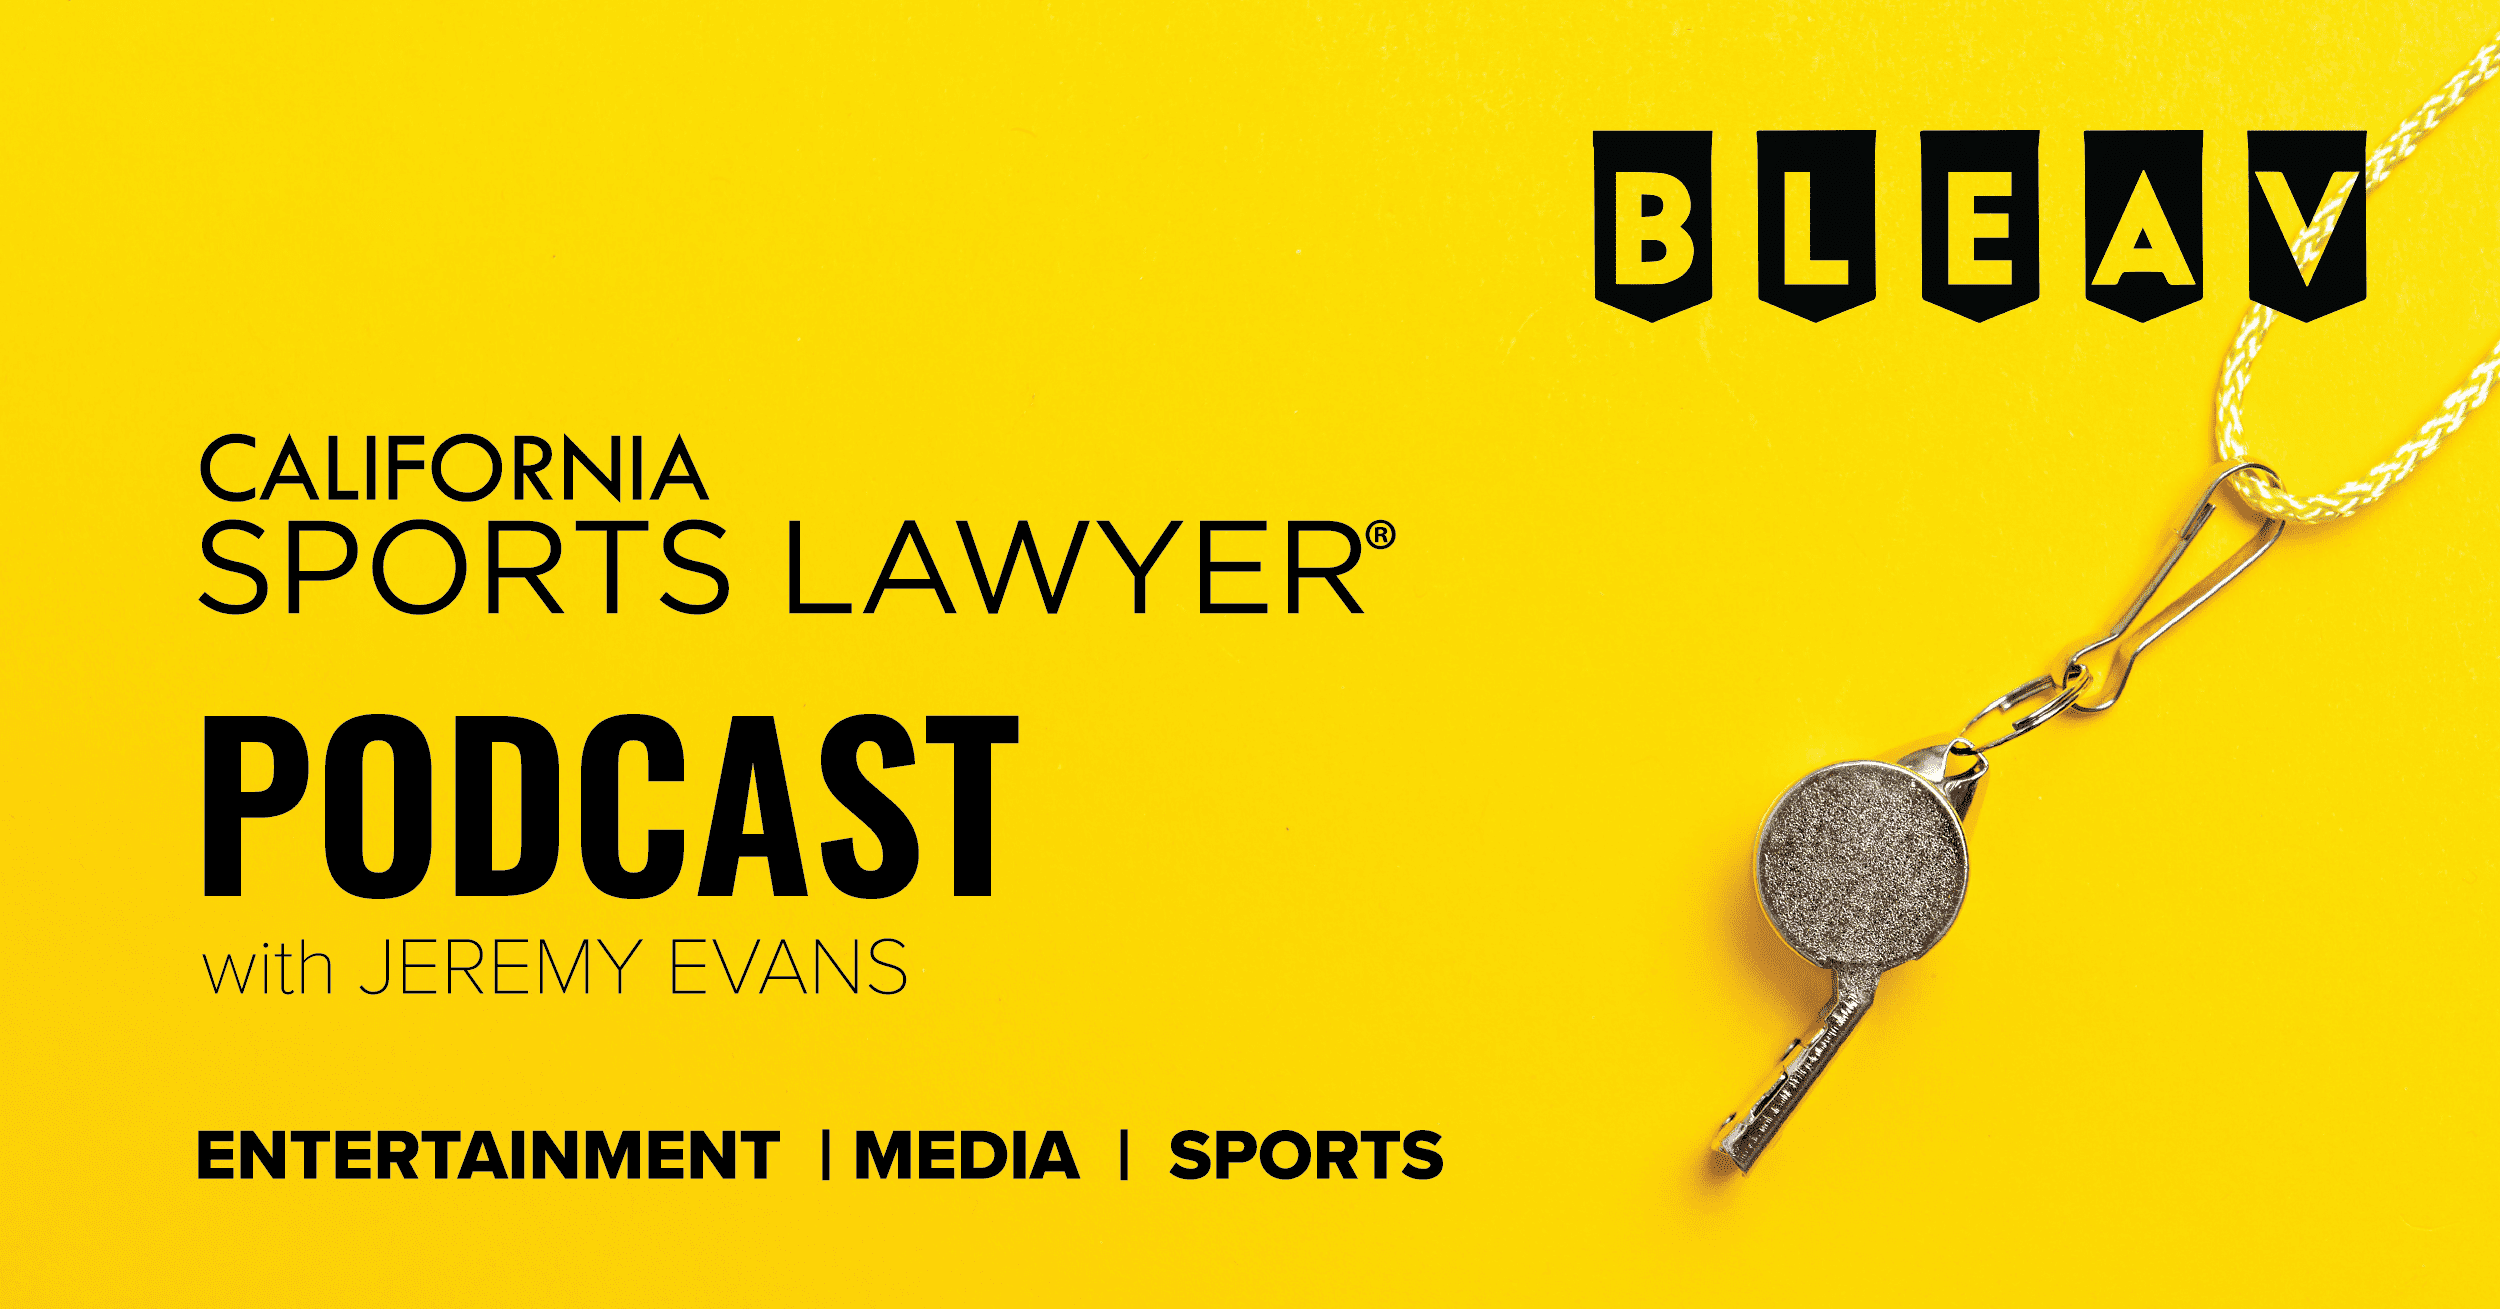 California Sports Lawyer® Podcast with Jeremy Evans: Highlighting the Life and Experiences of Frank Sinatra through the Eyes of a former Band Member